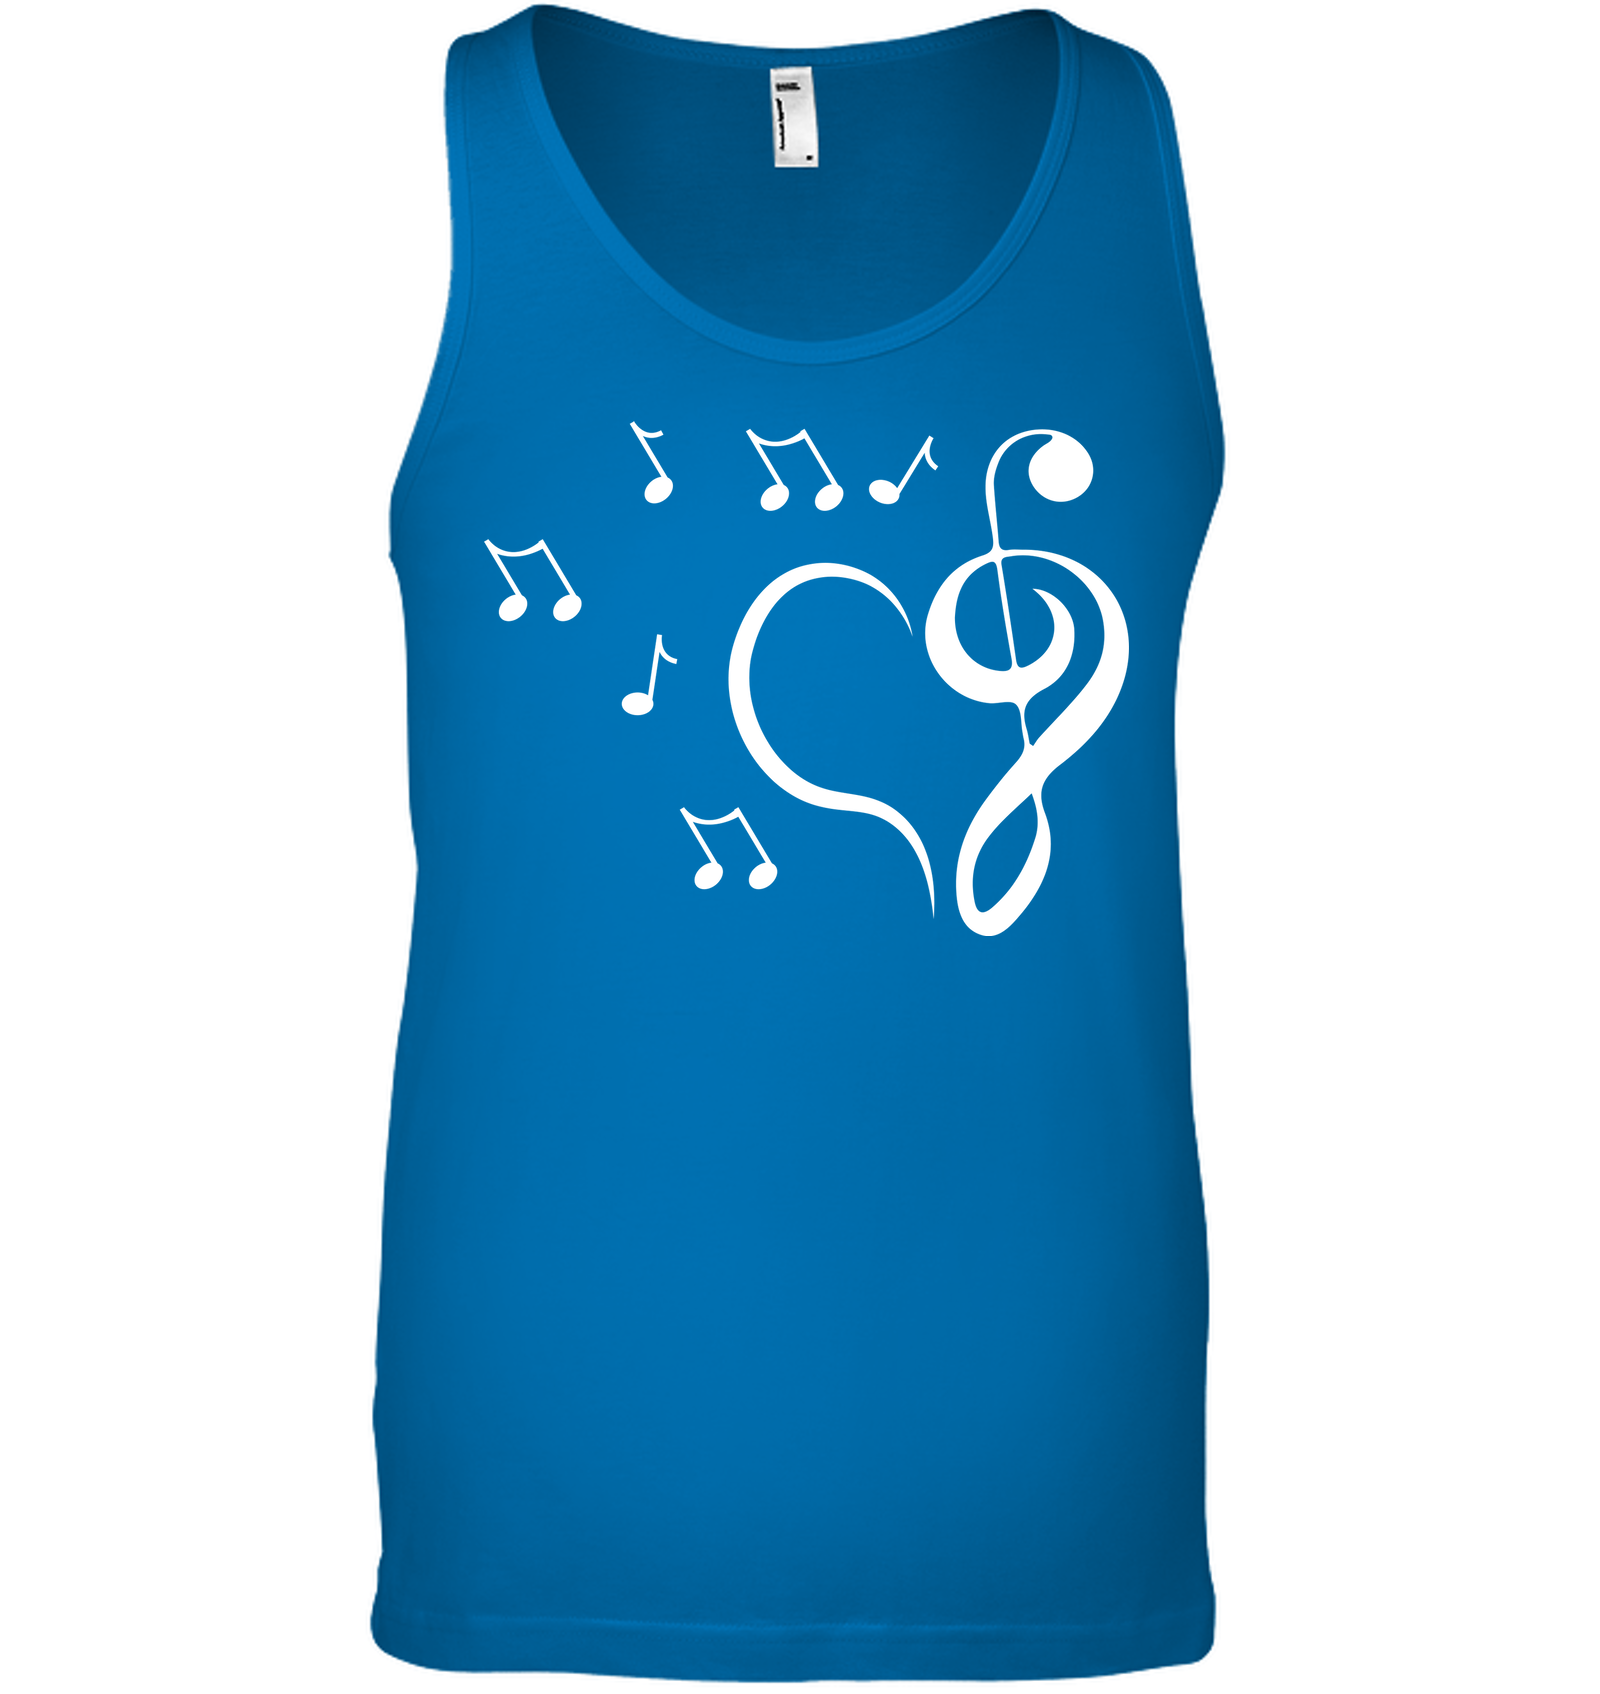 Musical heart with floating notes - Bella + Canvas Unisex Jersey Tank